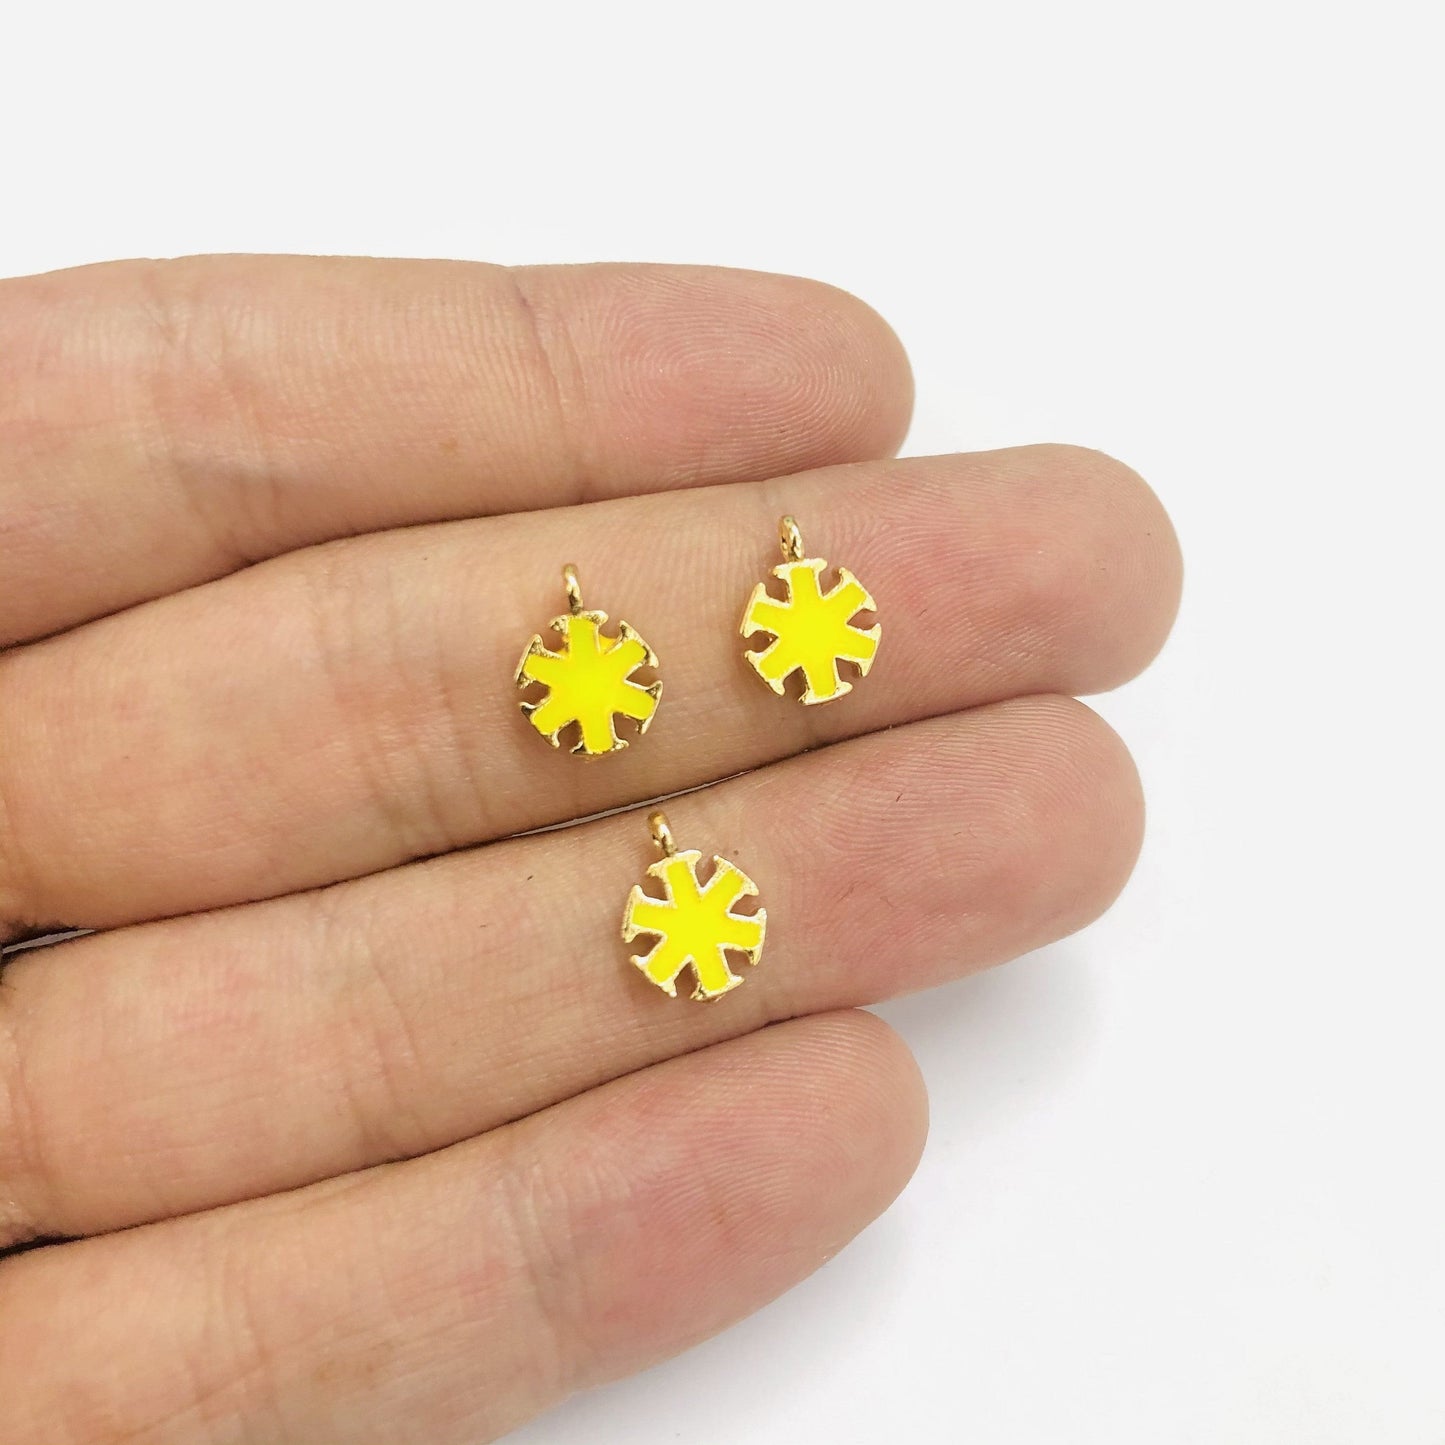 Gold-Plated Enamel Snowflake Shaking Attachment - Neon Yellow